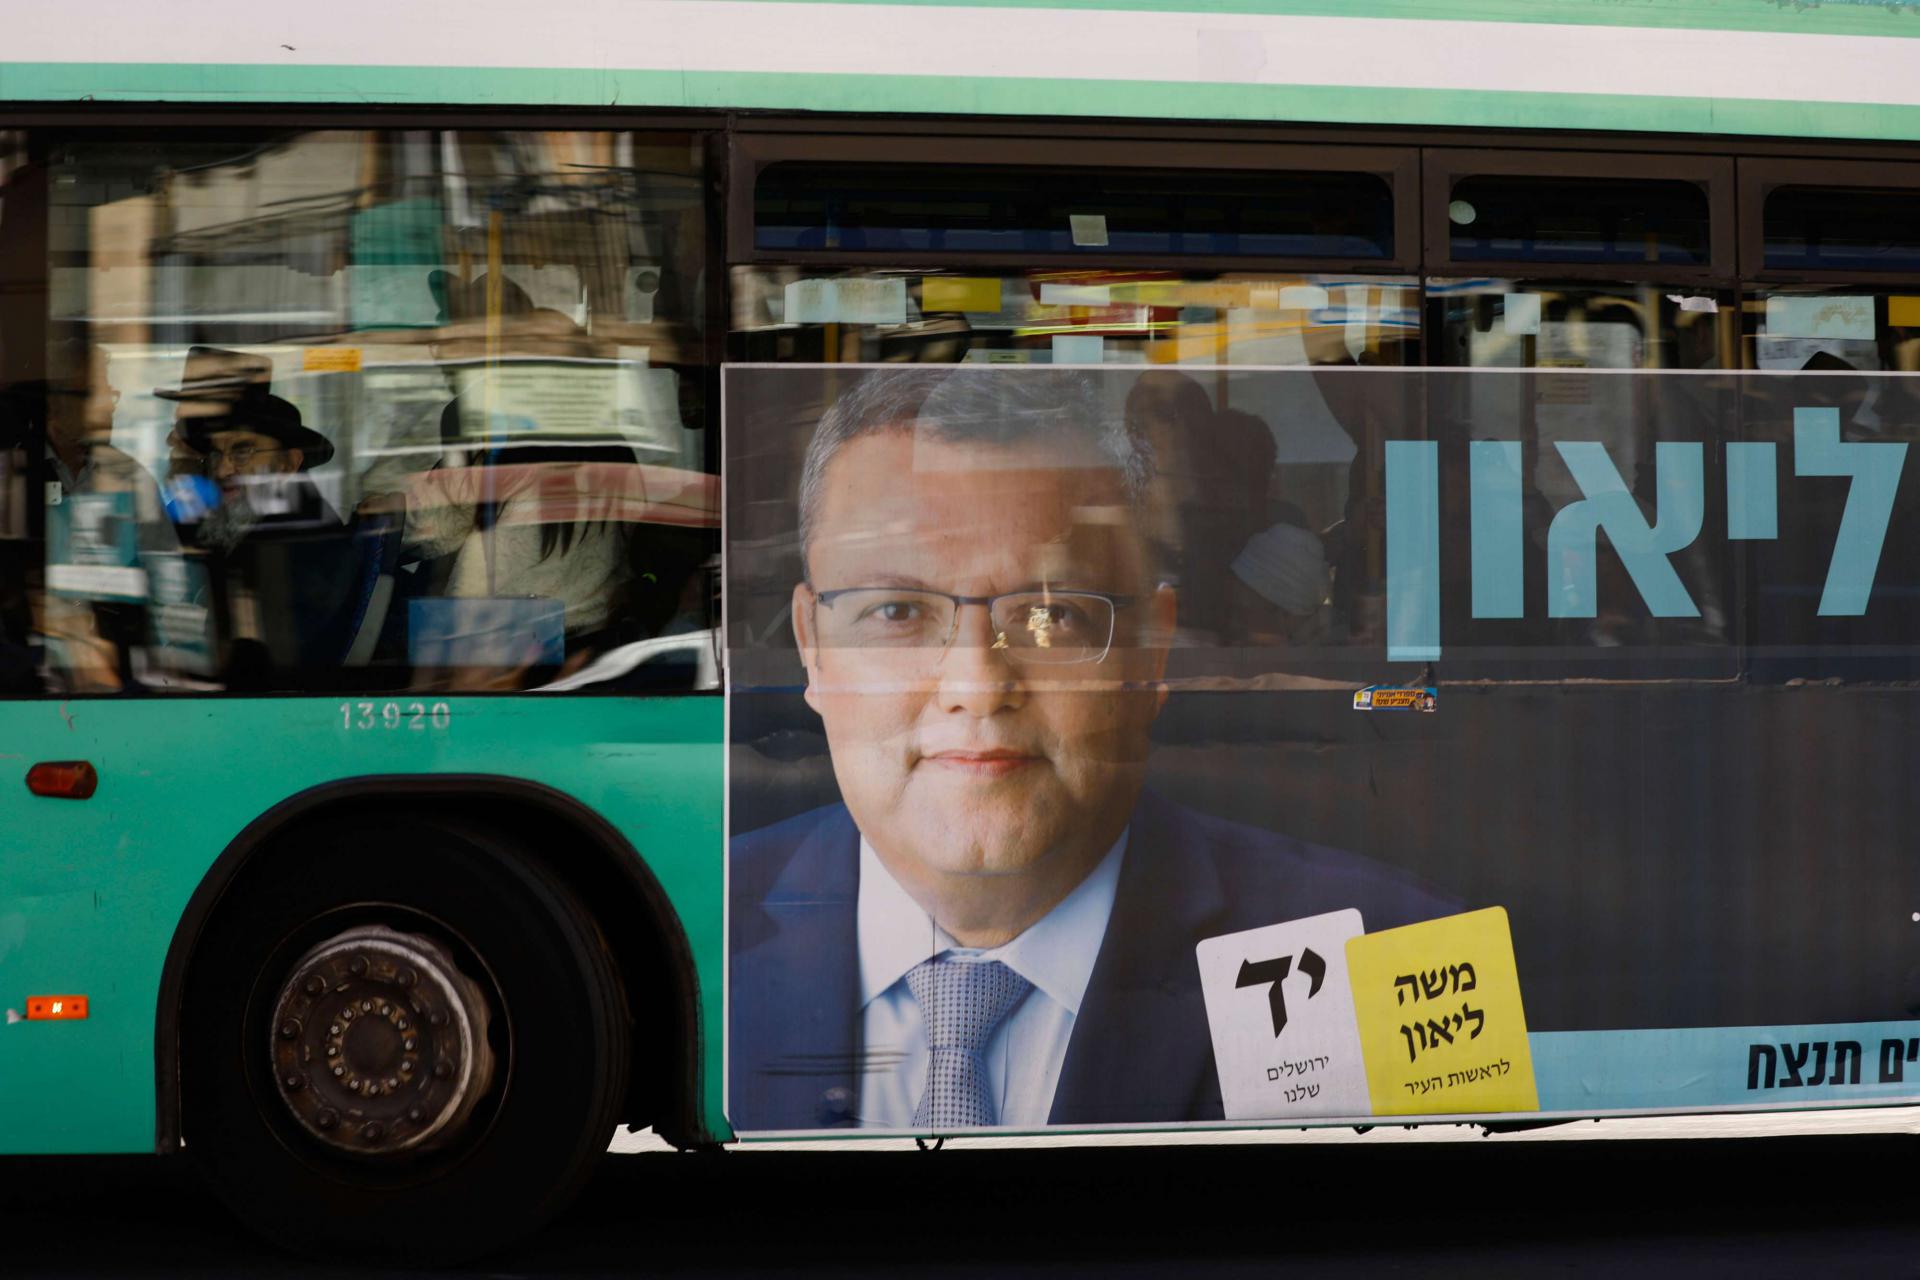 A campaign poster of municipal candidate Moshe Lion on a bus ahead of the upcoming Jerusalem municipal elections, in Jerusalem.